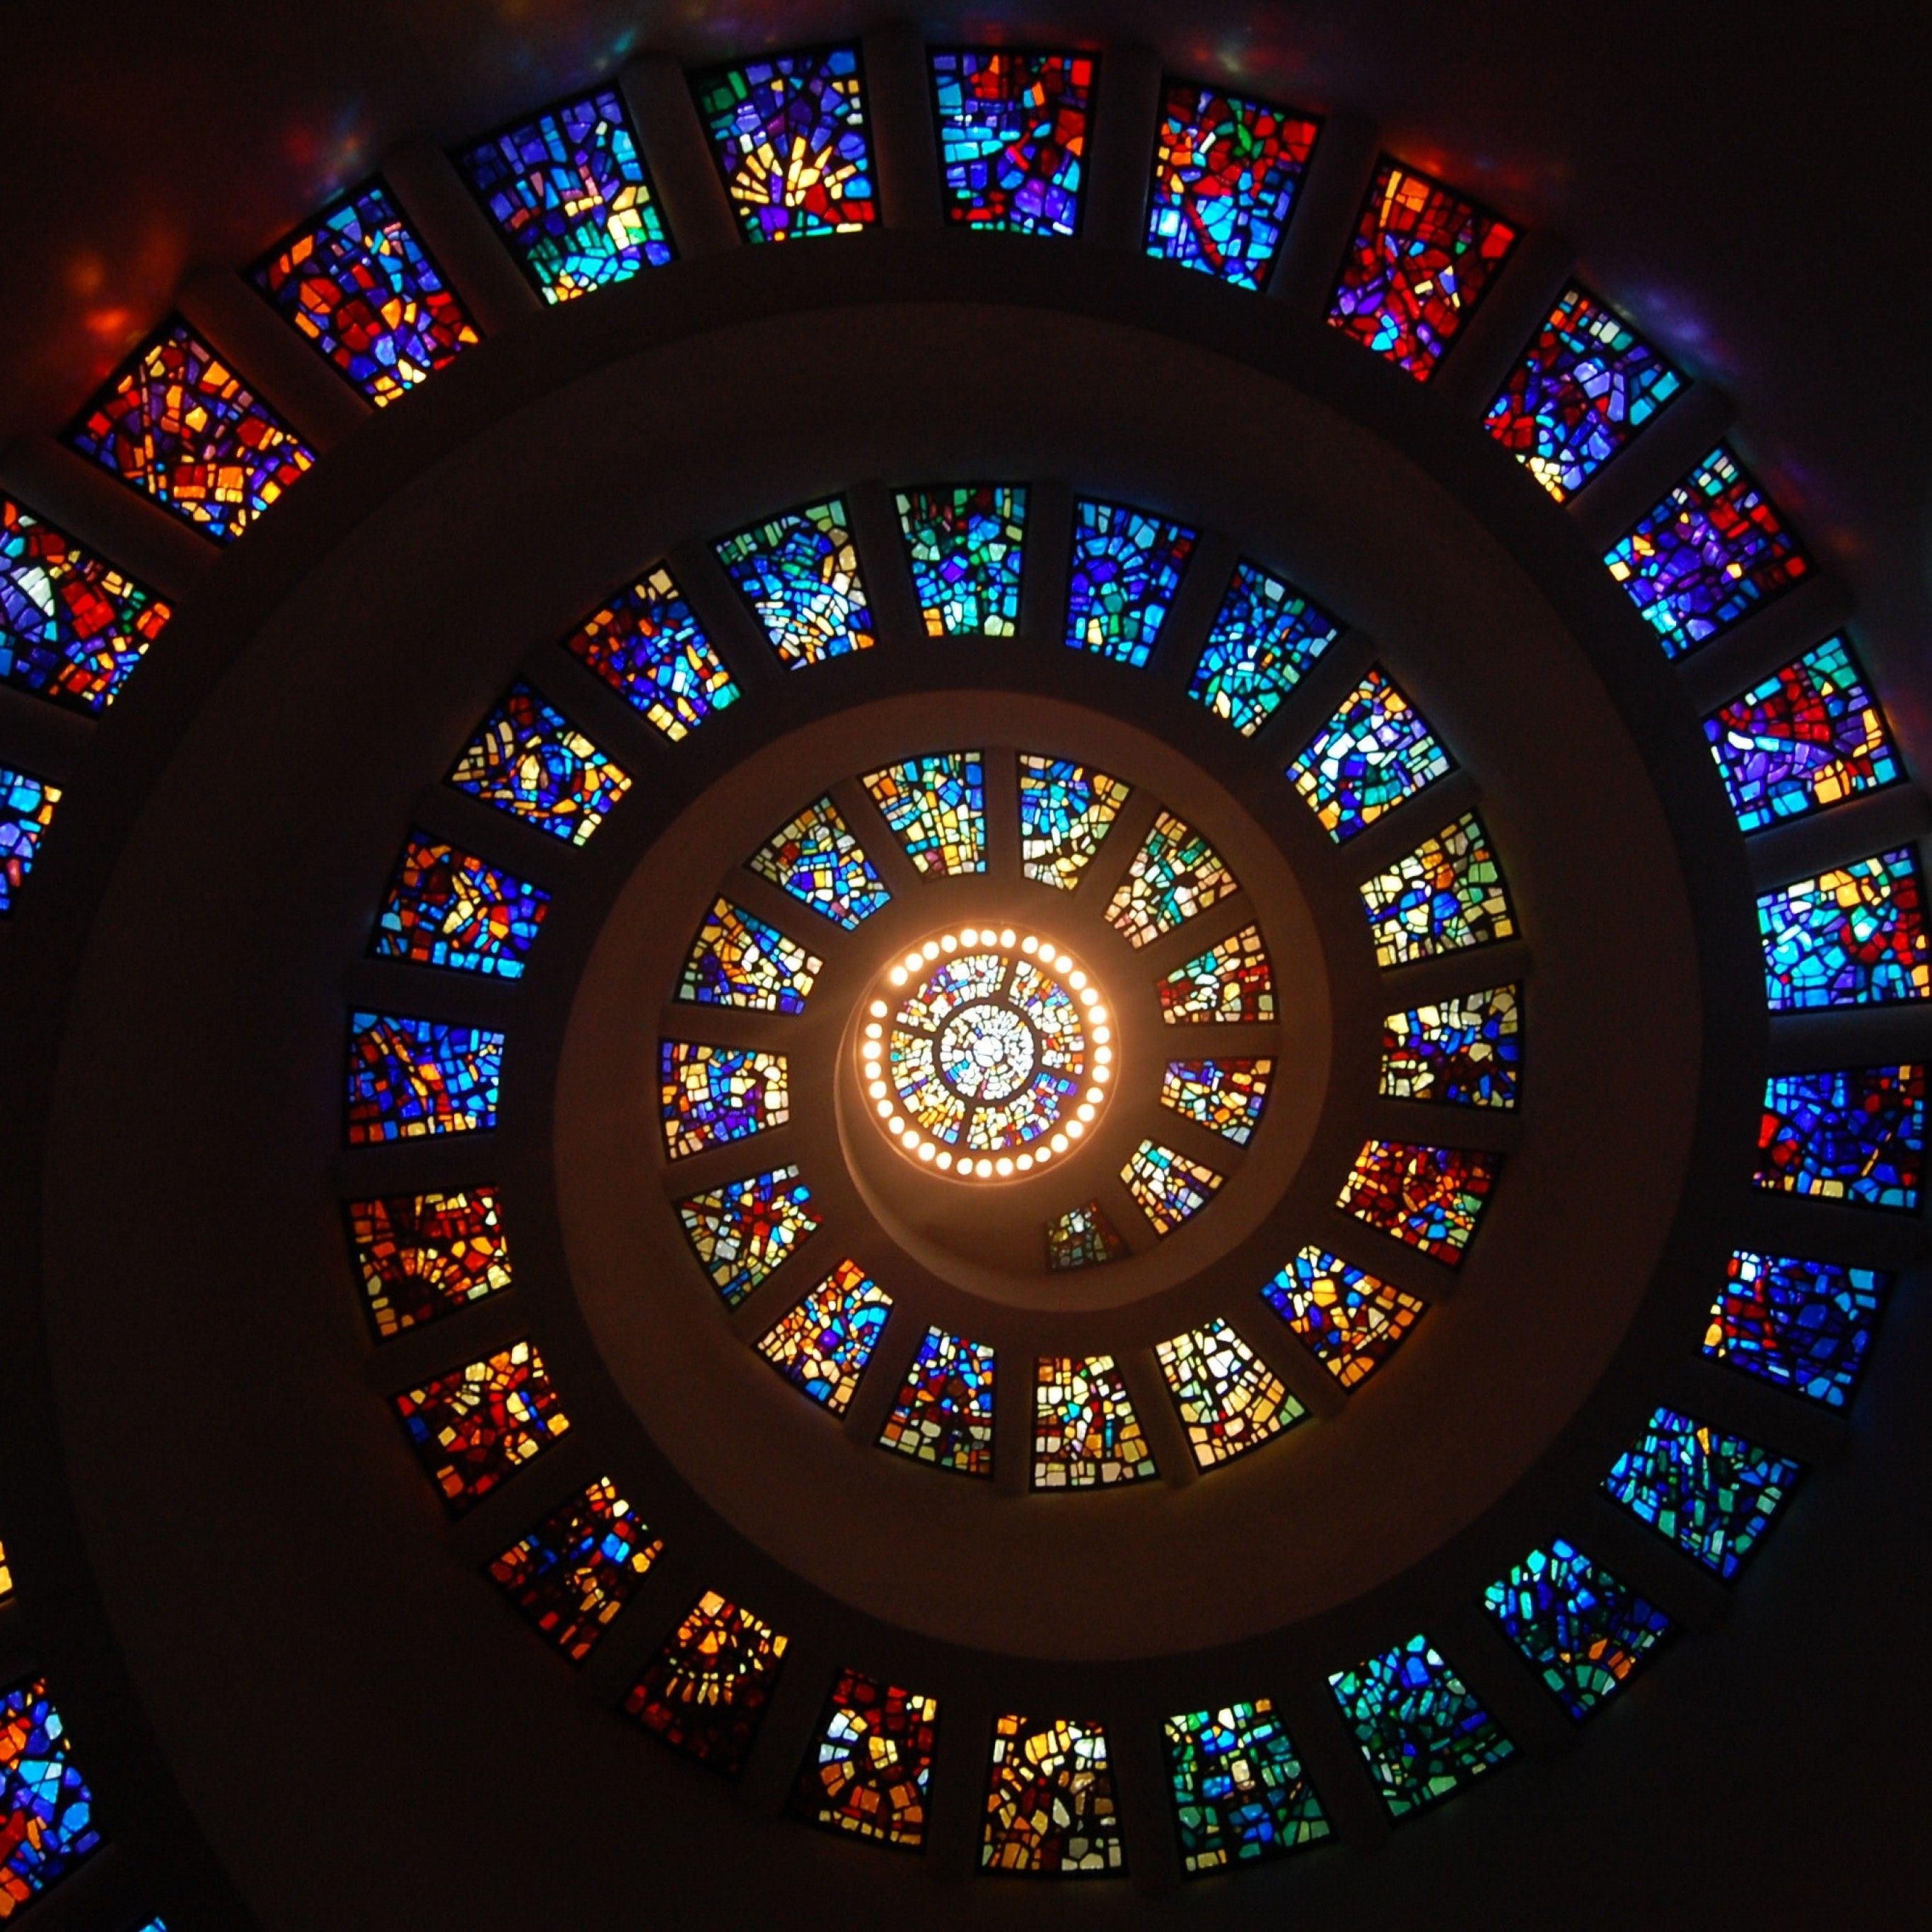 Spiral ceiling 4K Wallpaper, Stained glass, Church, HD, Photography